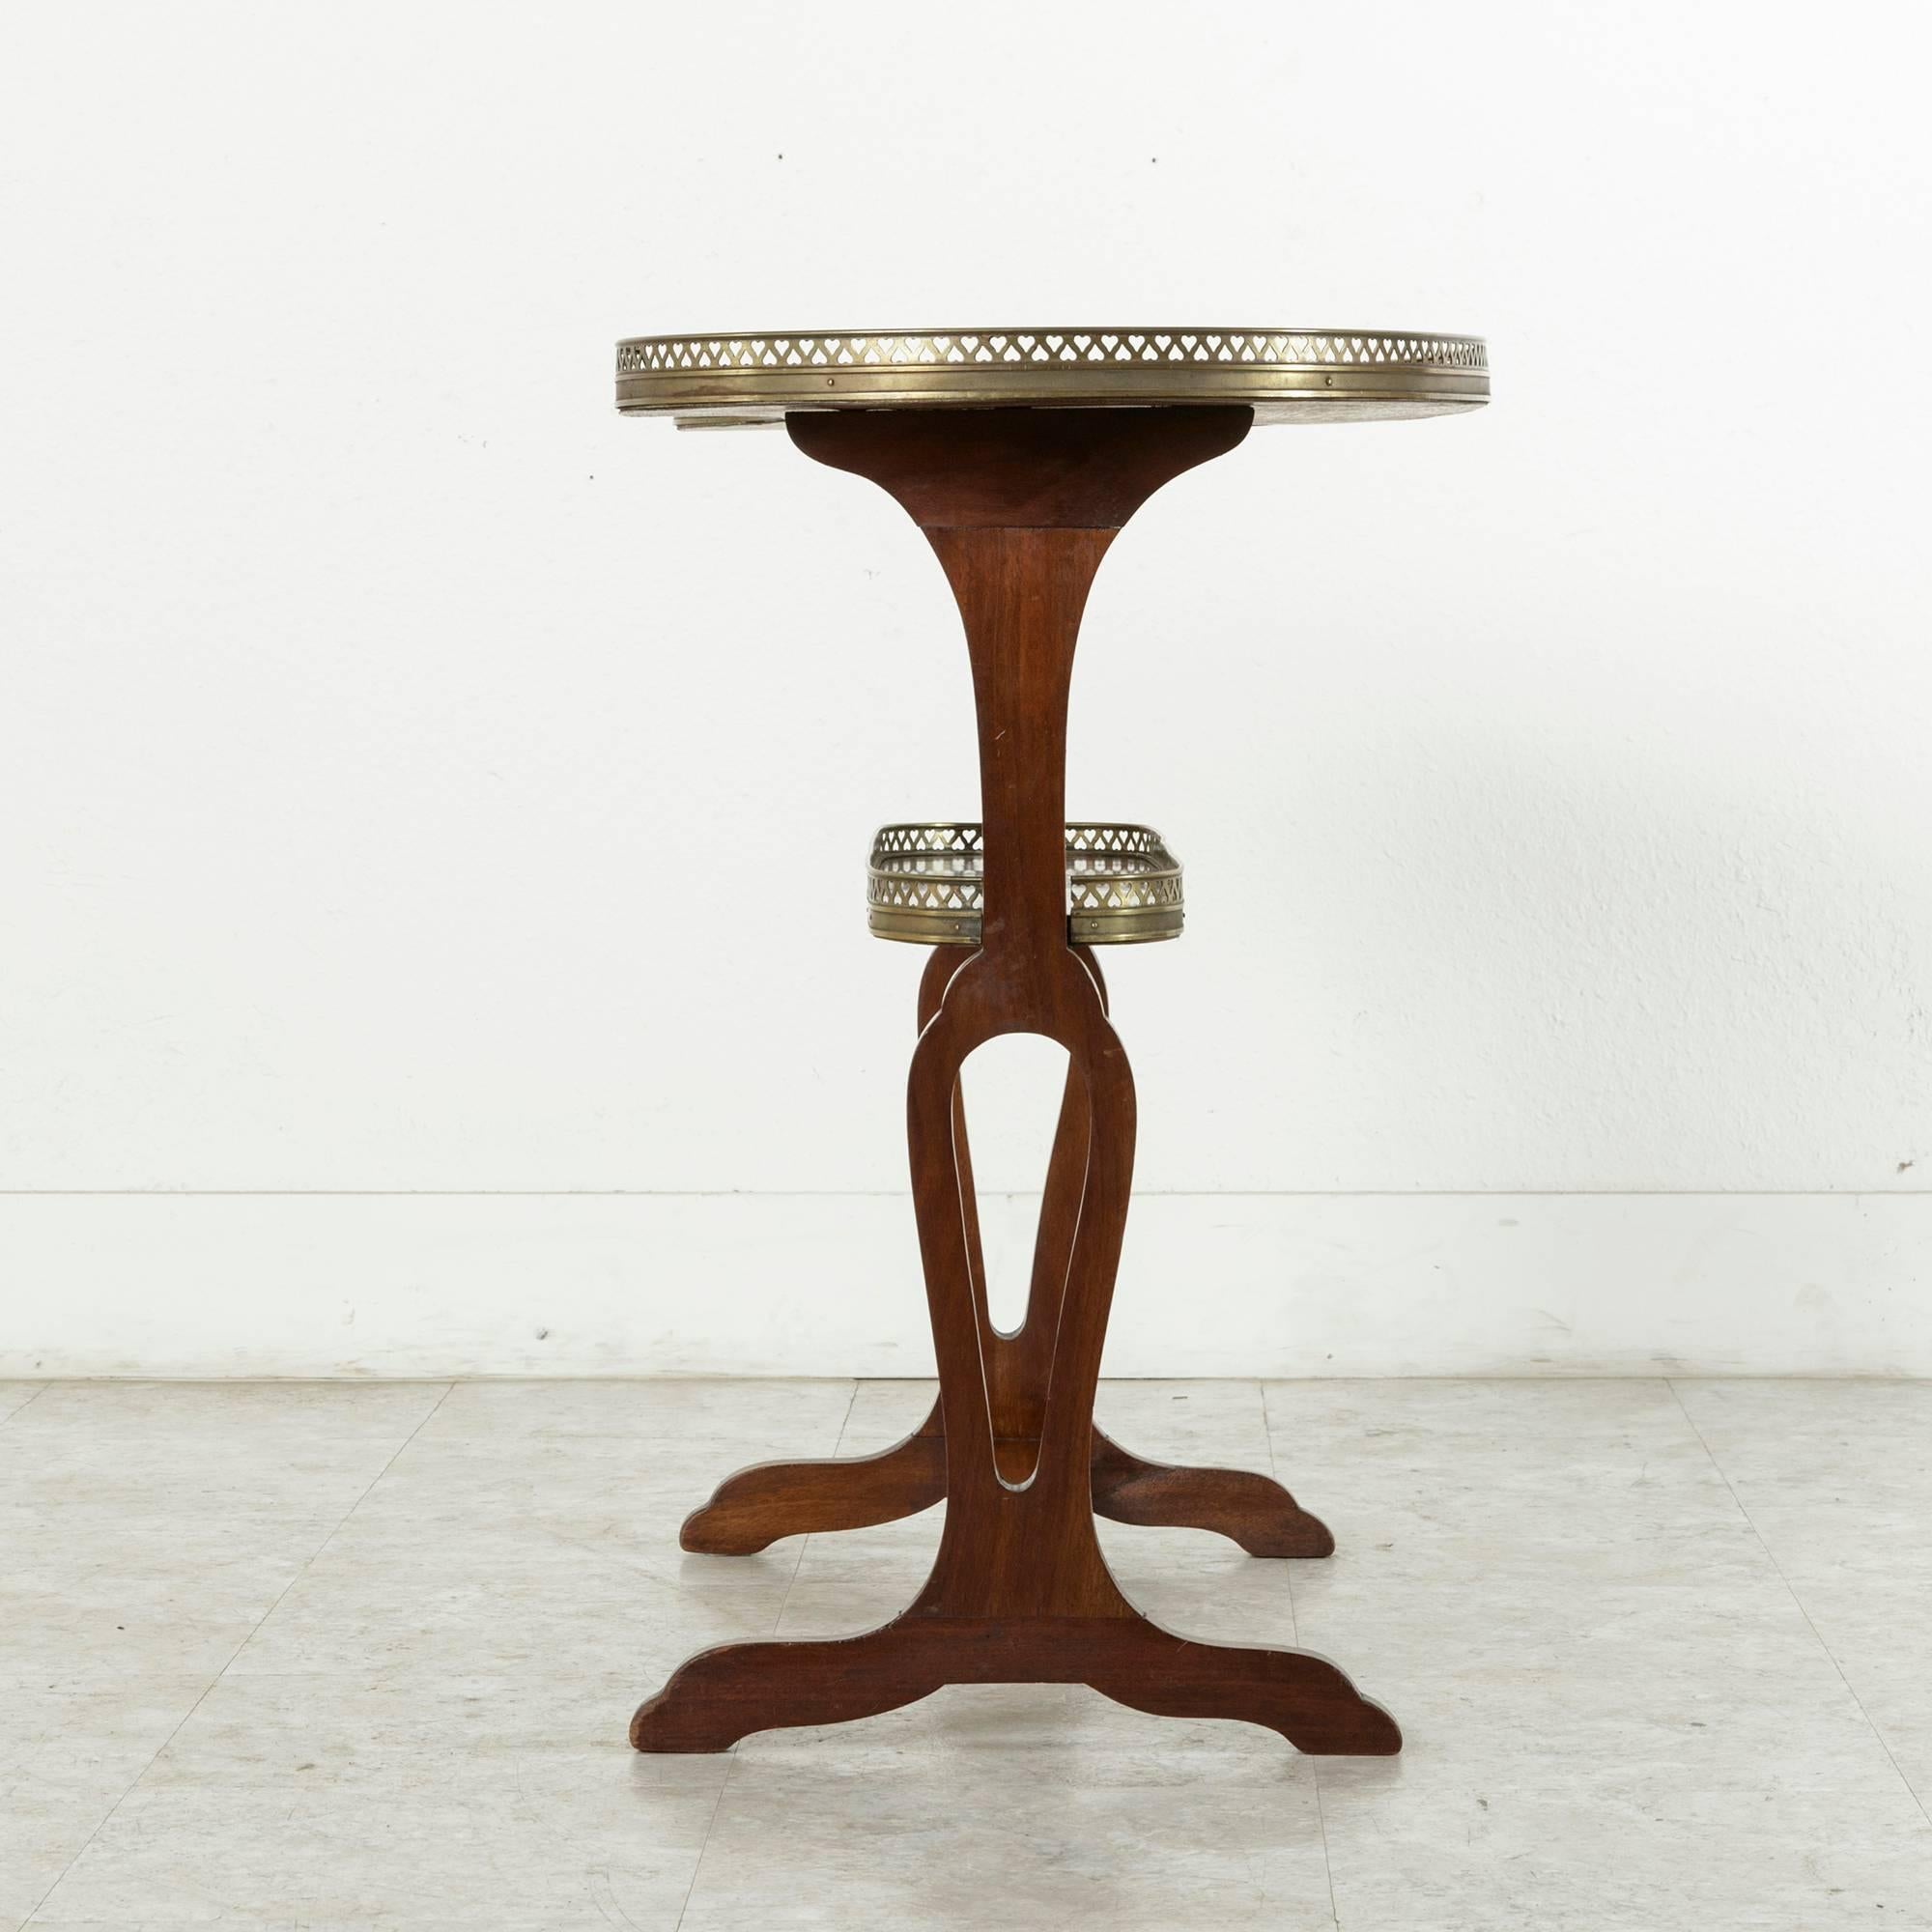 Restauration Period Rognon or Kidney Side Table in Mahogany with Bronze Gallery 1